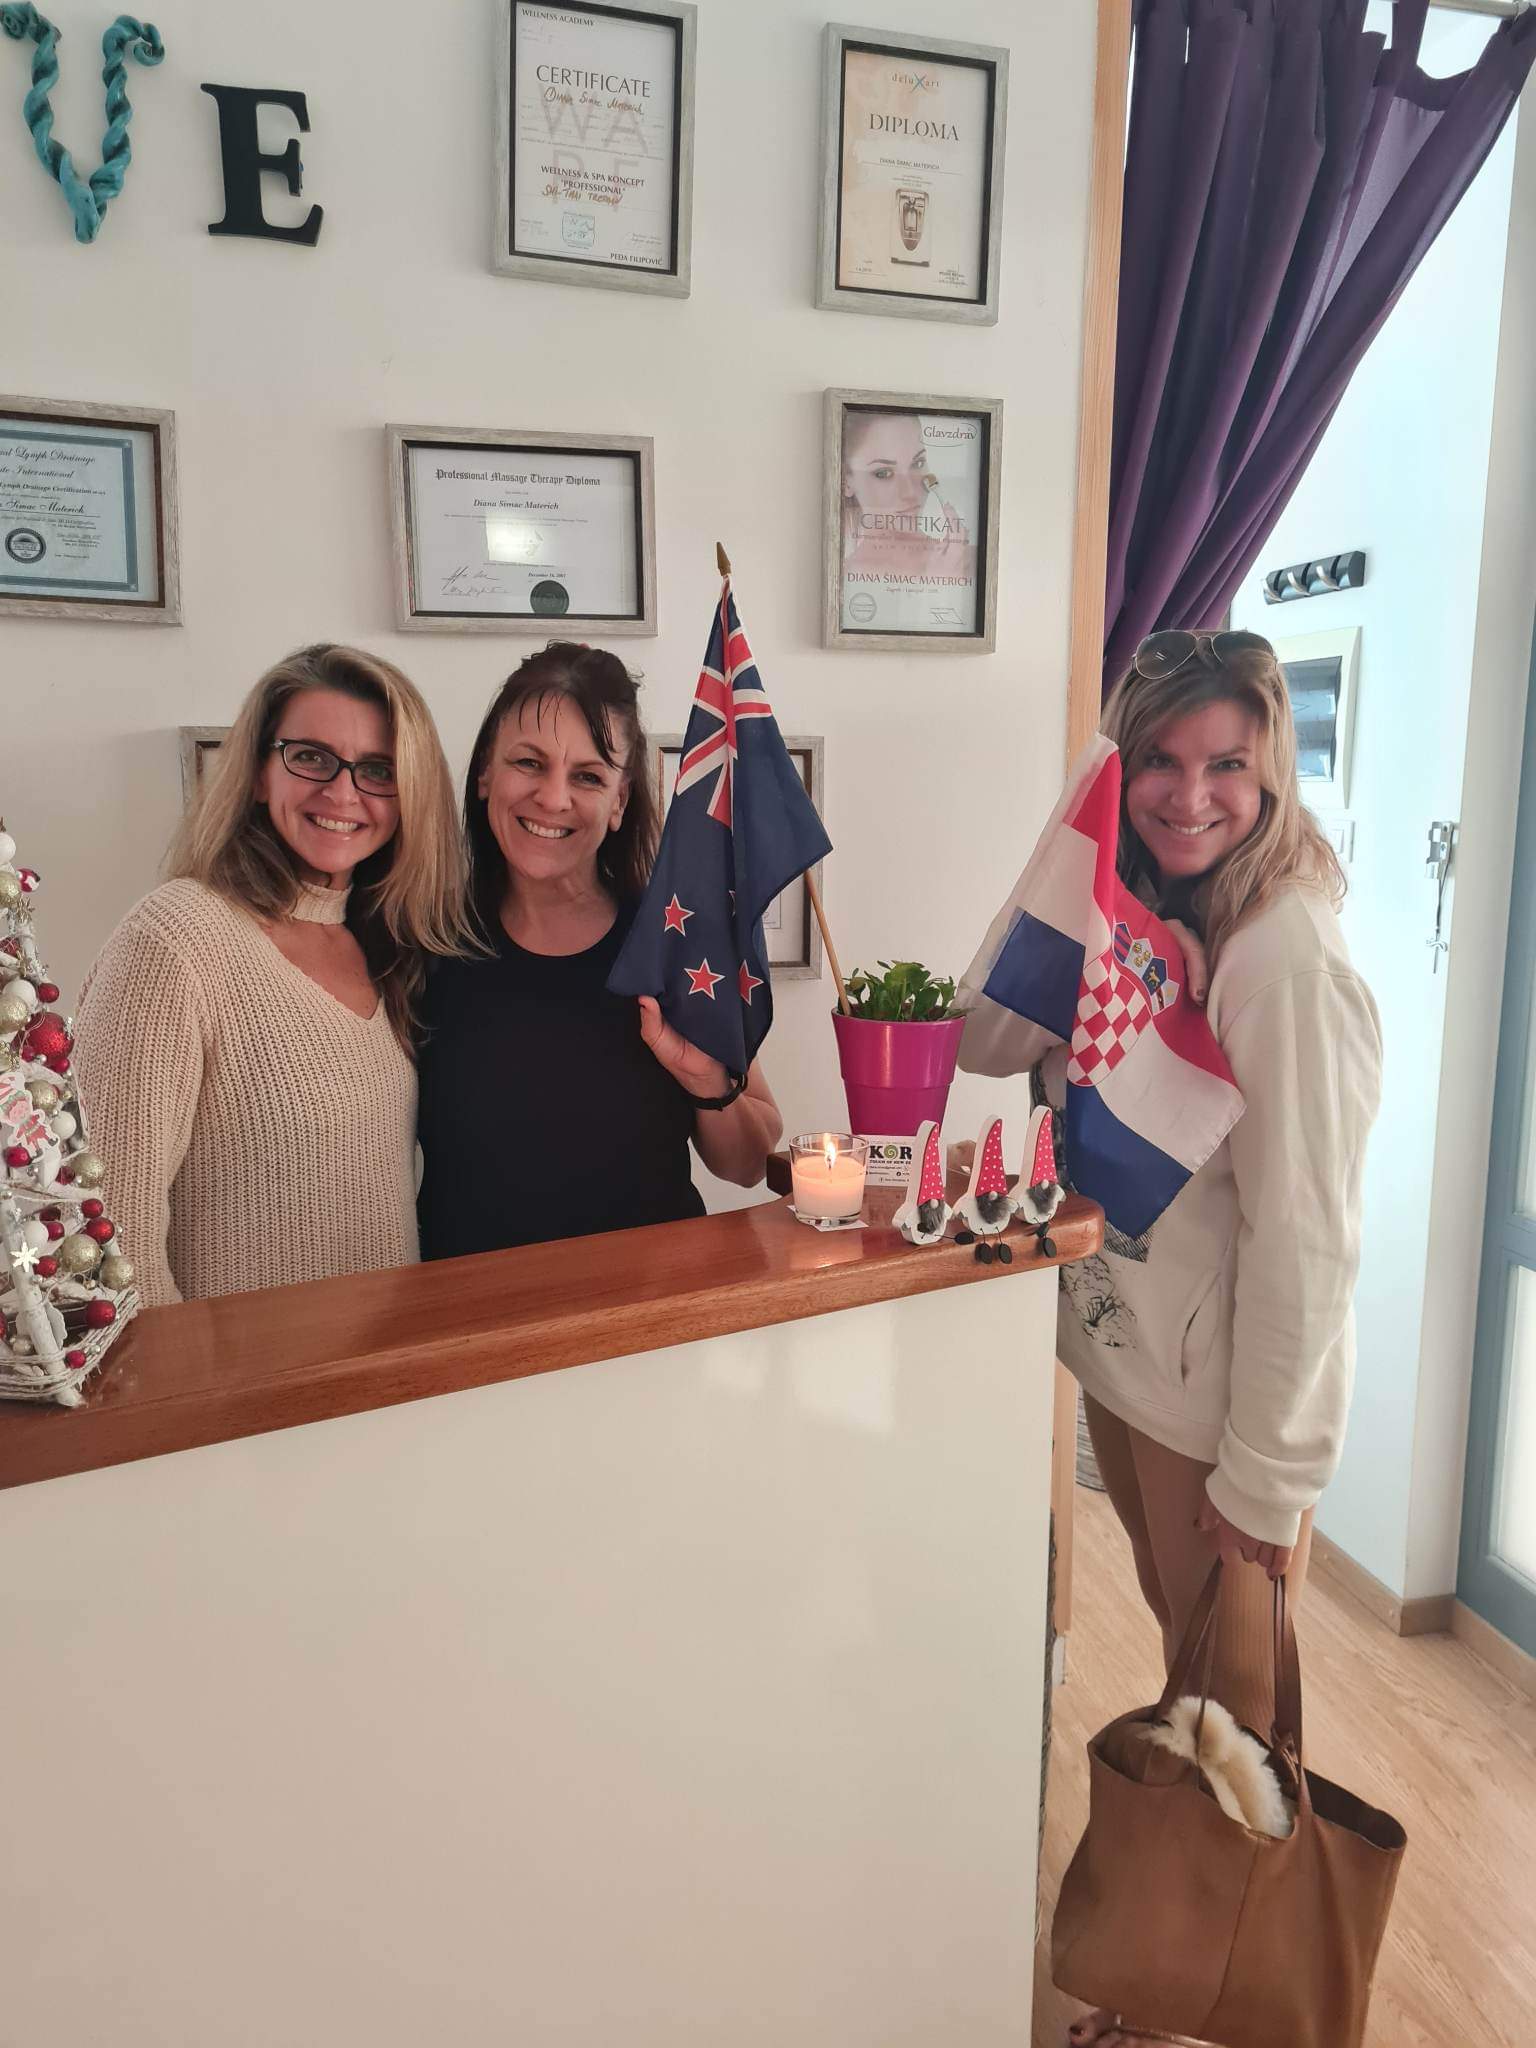 The aligned move that just made sense – moving to Croatia from New Zealand 